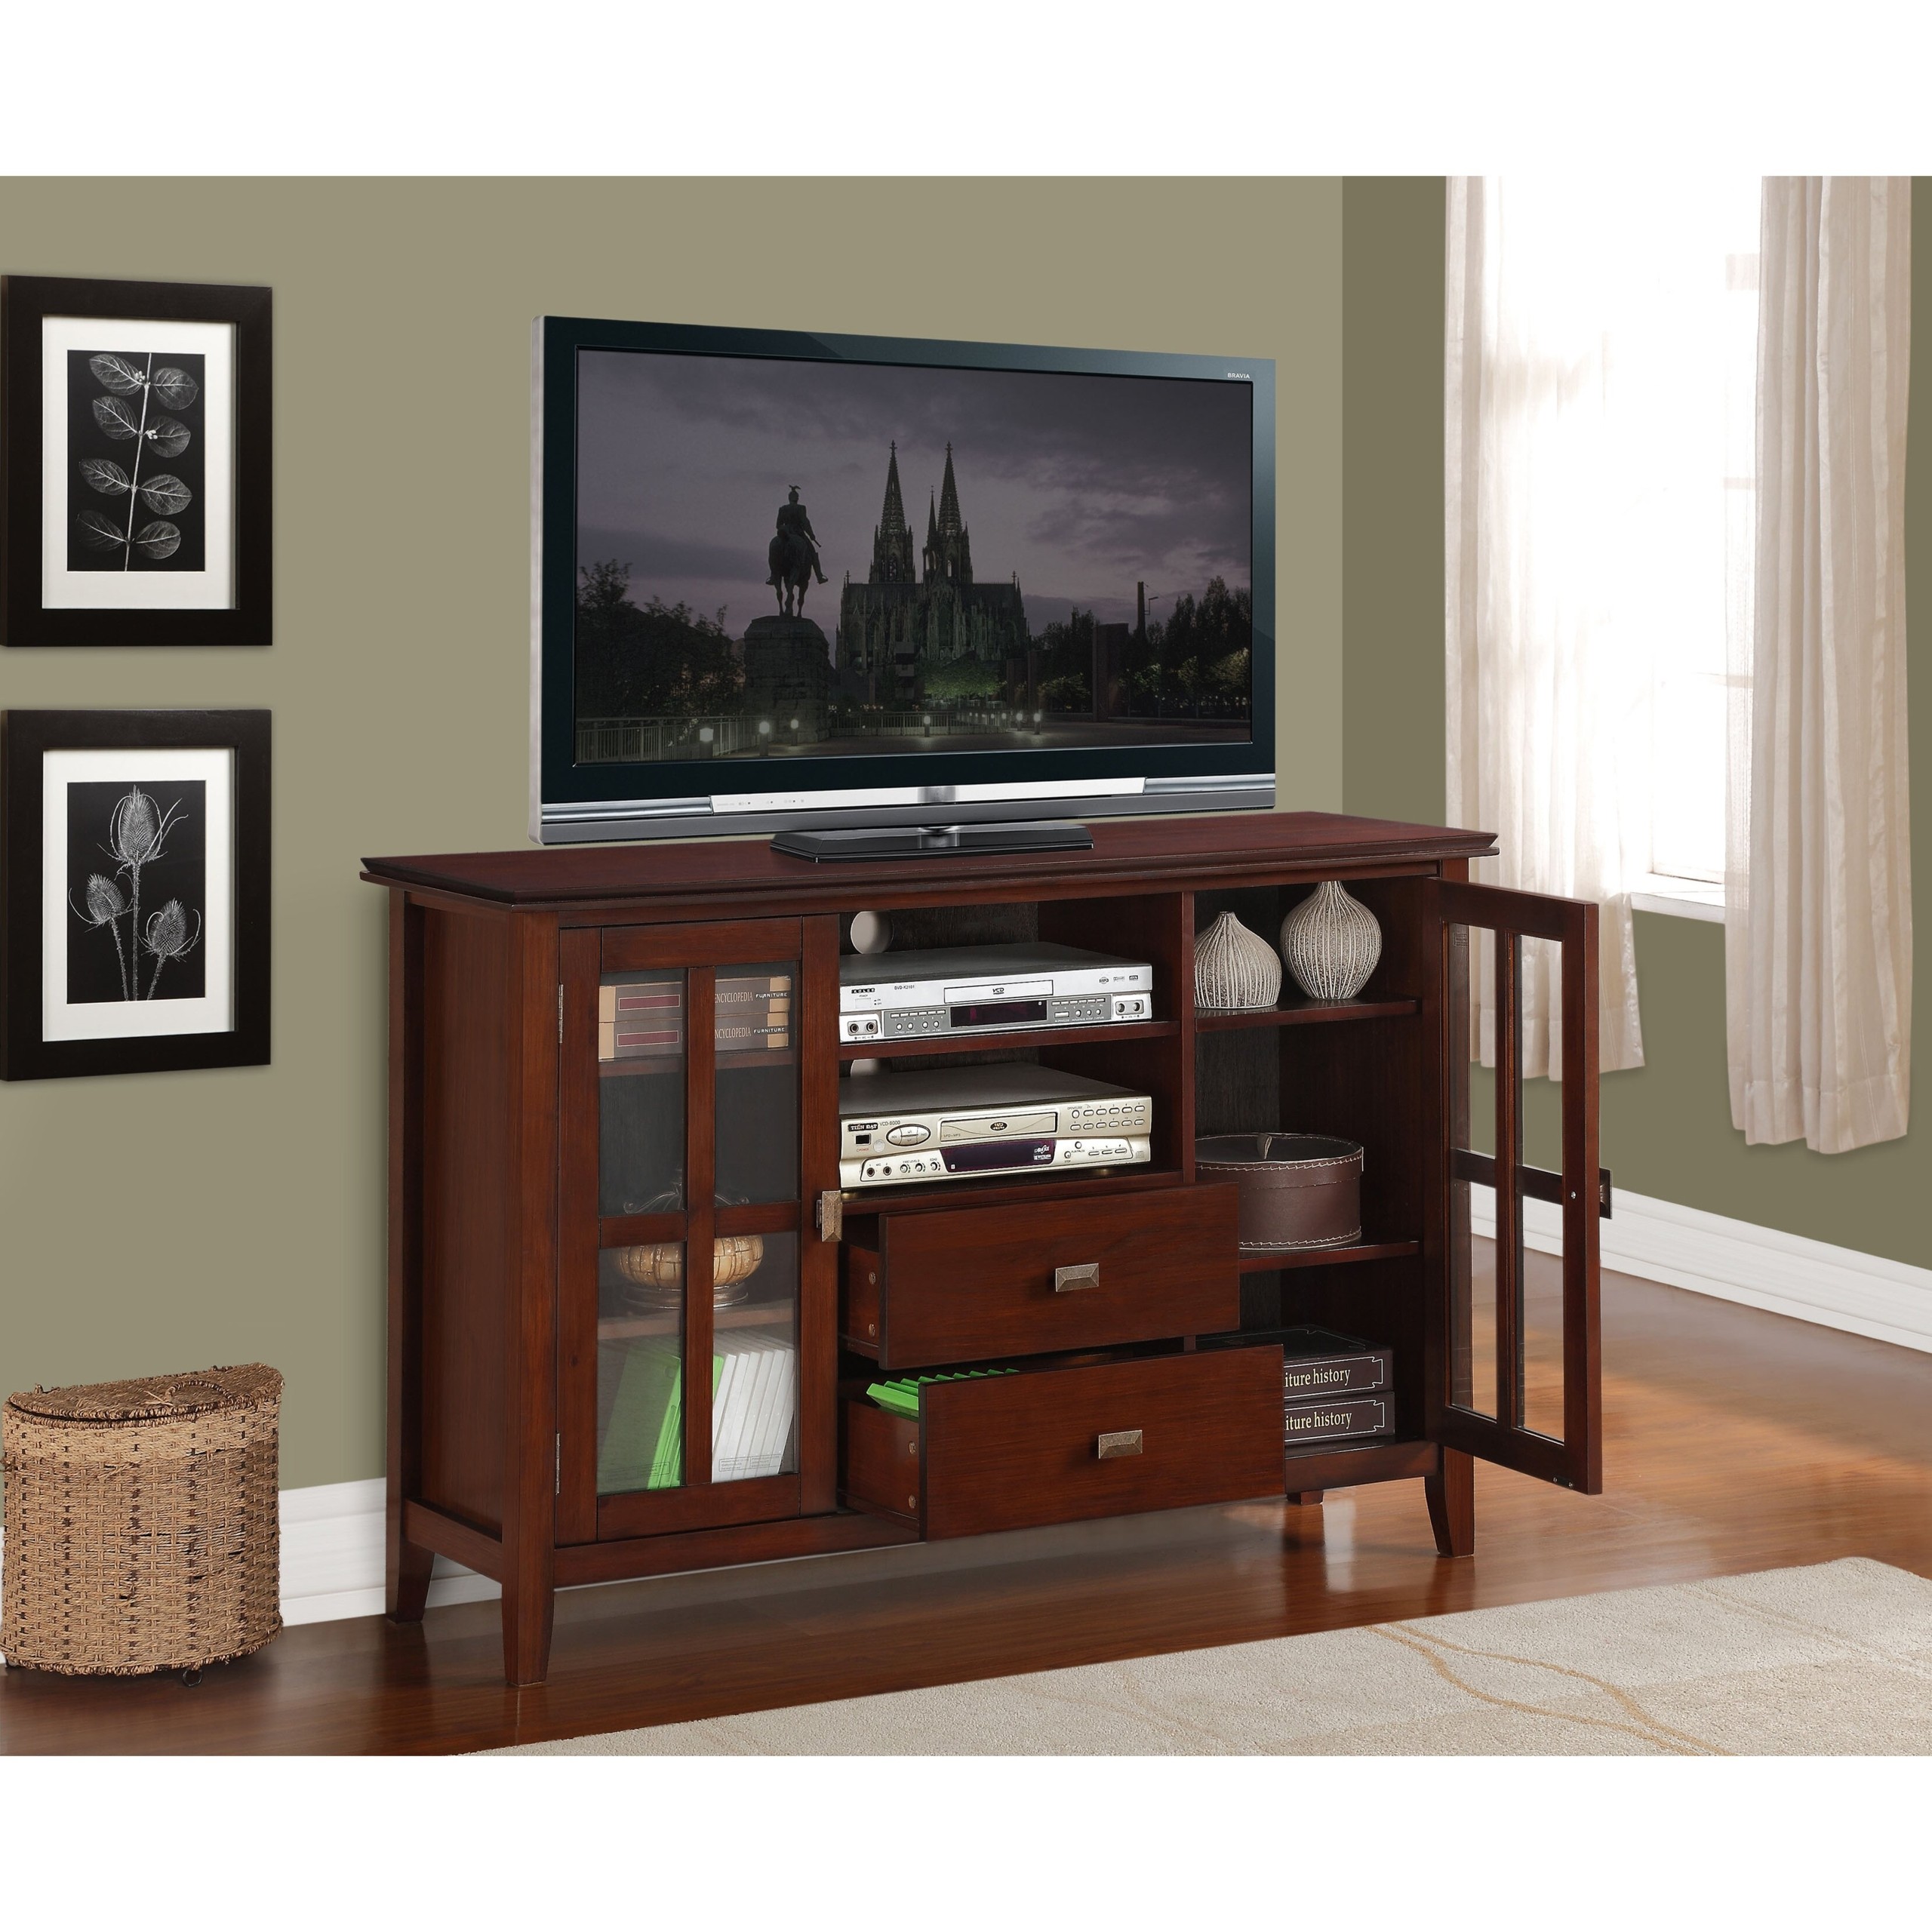 Simpli Home AXCHOL005 Artisan Collection 54-Inch Width by 36-Inch Height Tv Stand, Medium Auburn Brown, 1-Pack